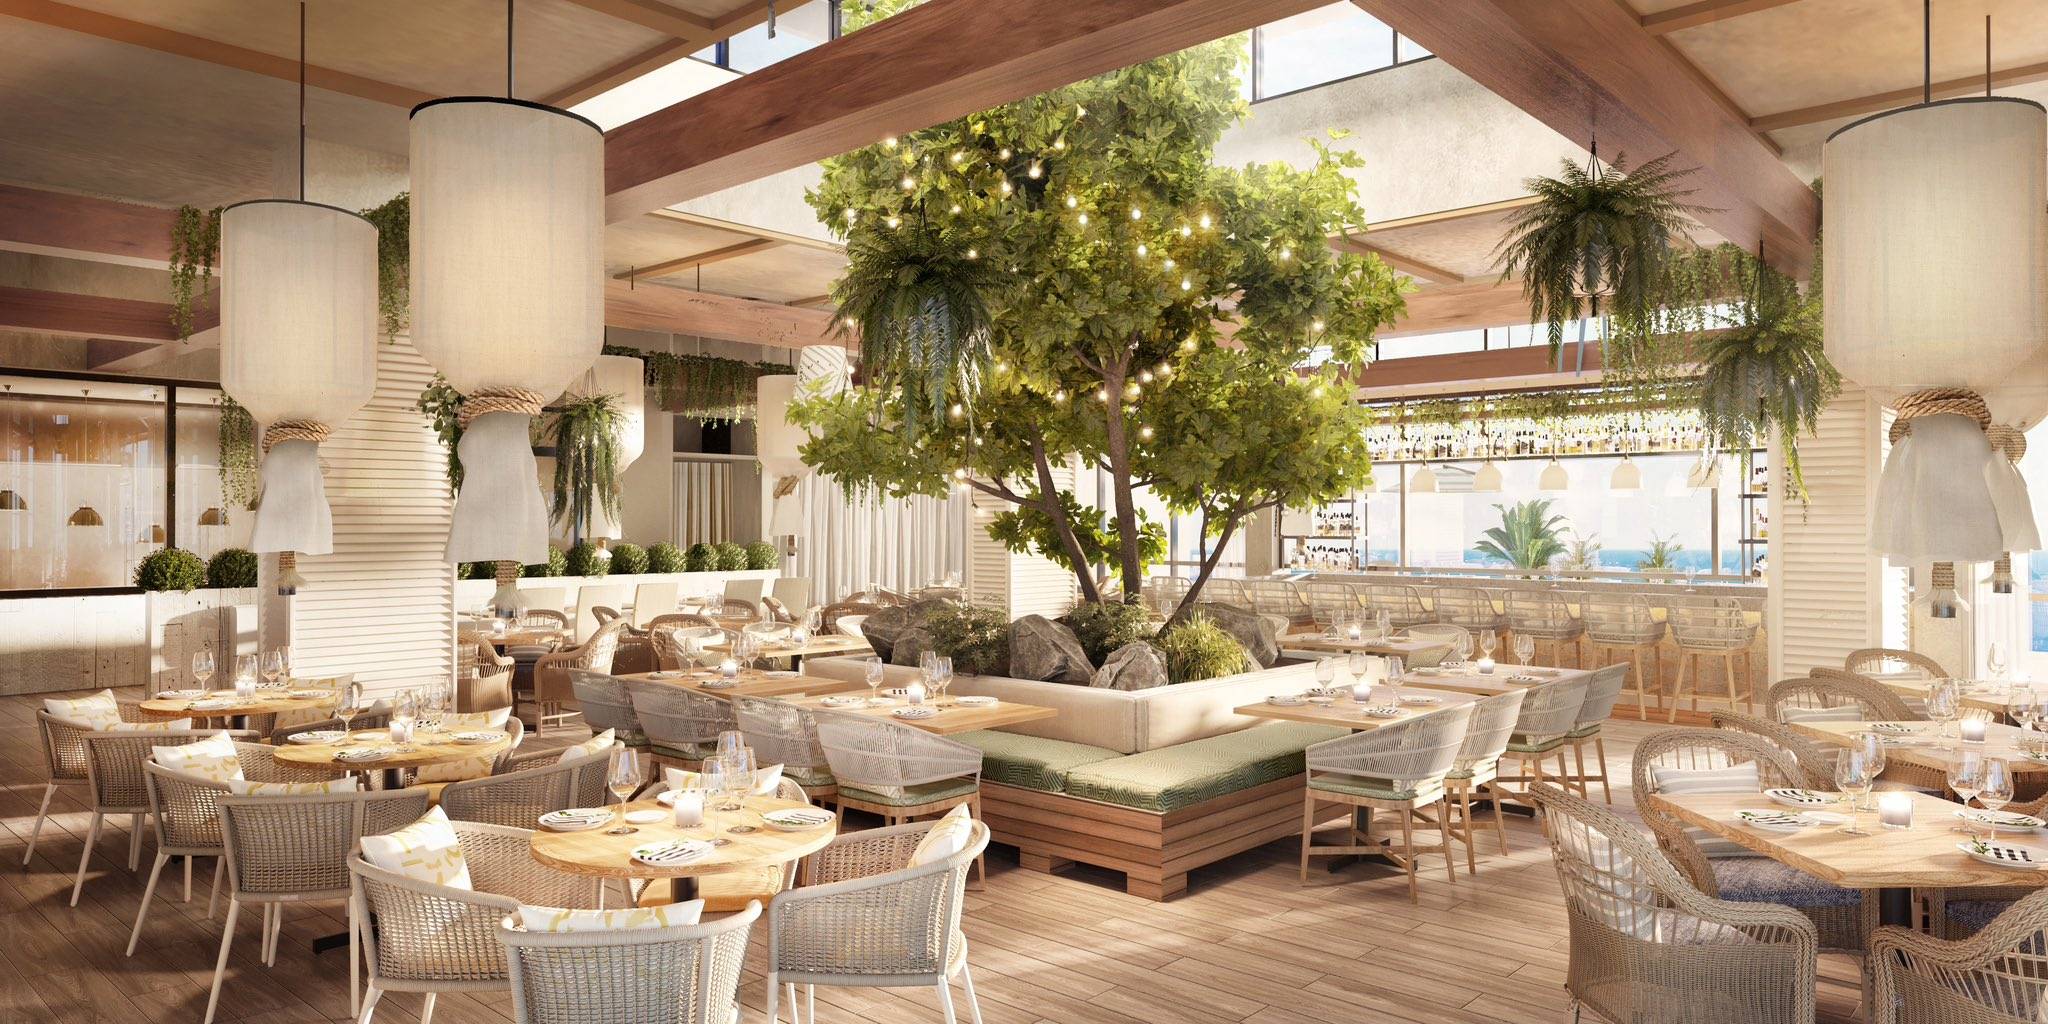 Full menus released for Summer House on the Lake opening soon at Disney Springs